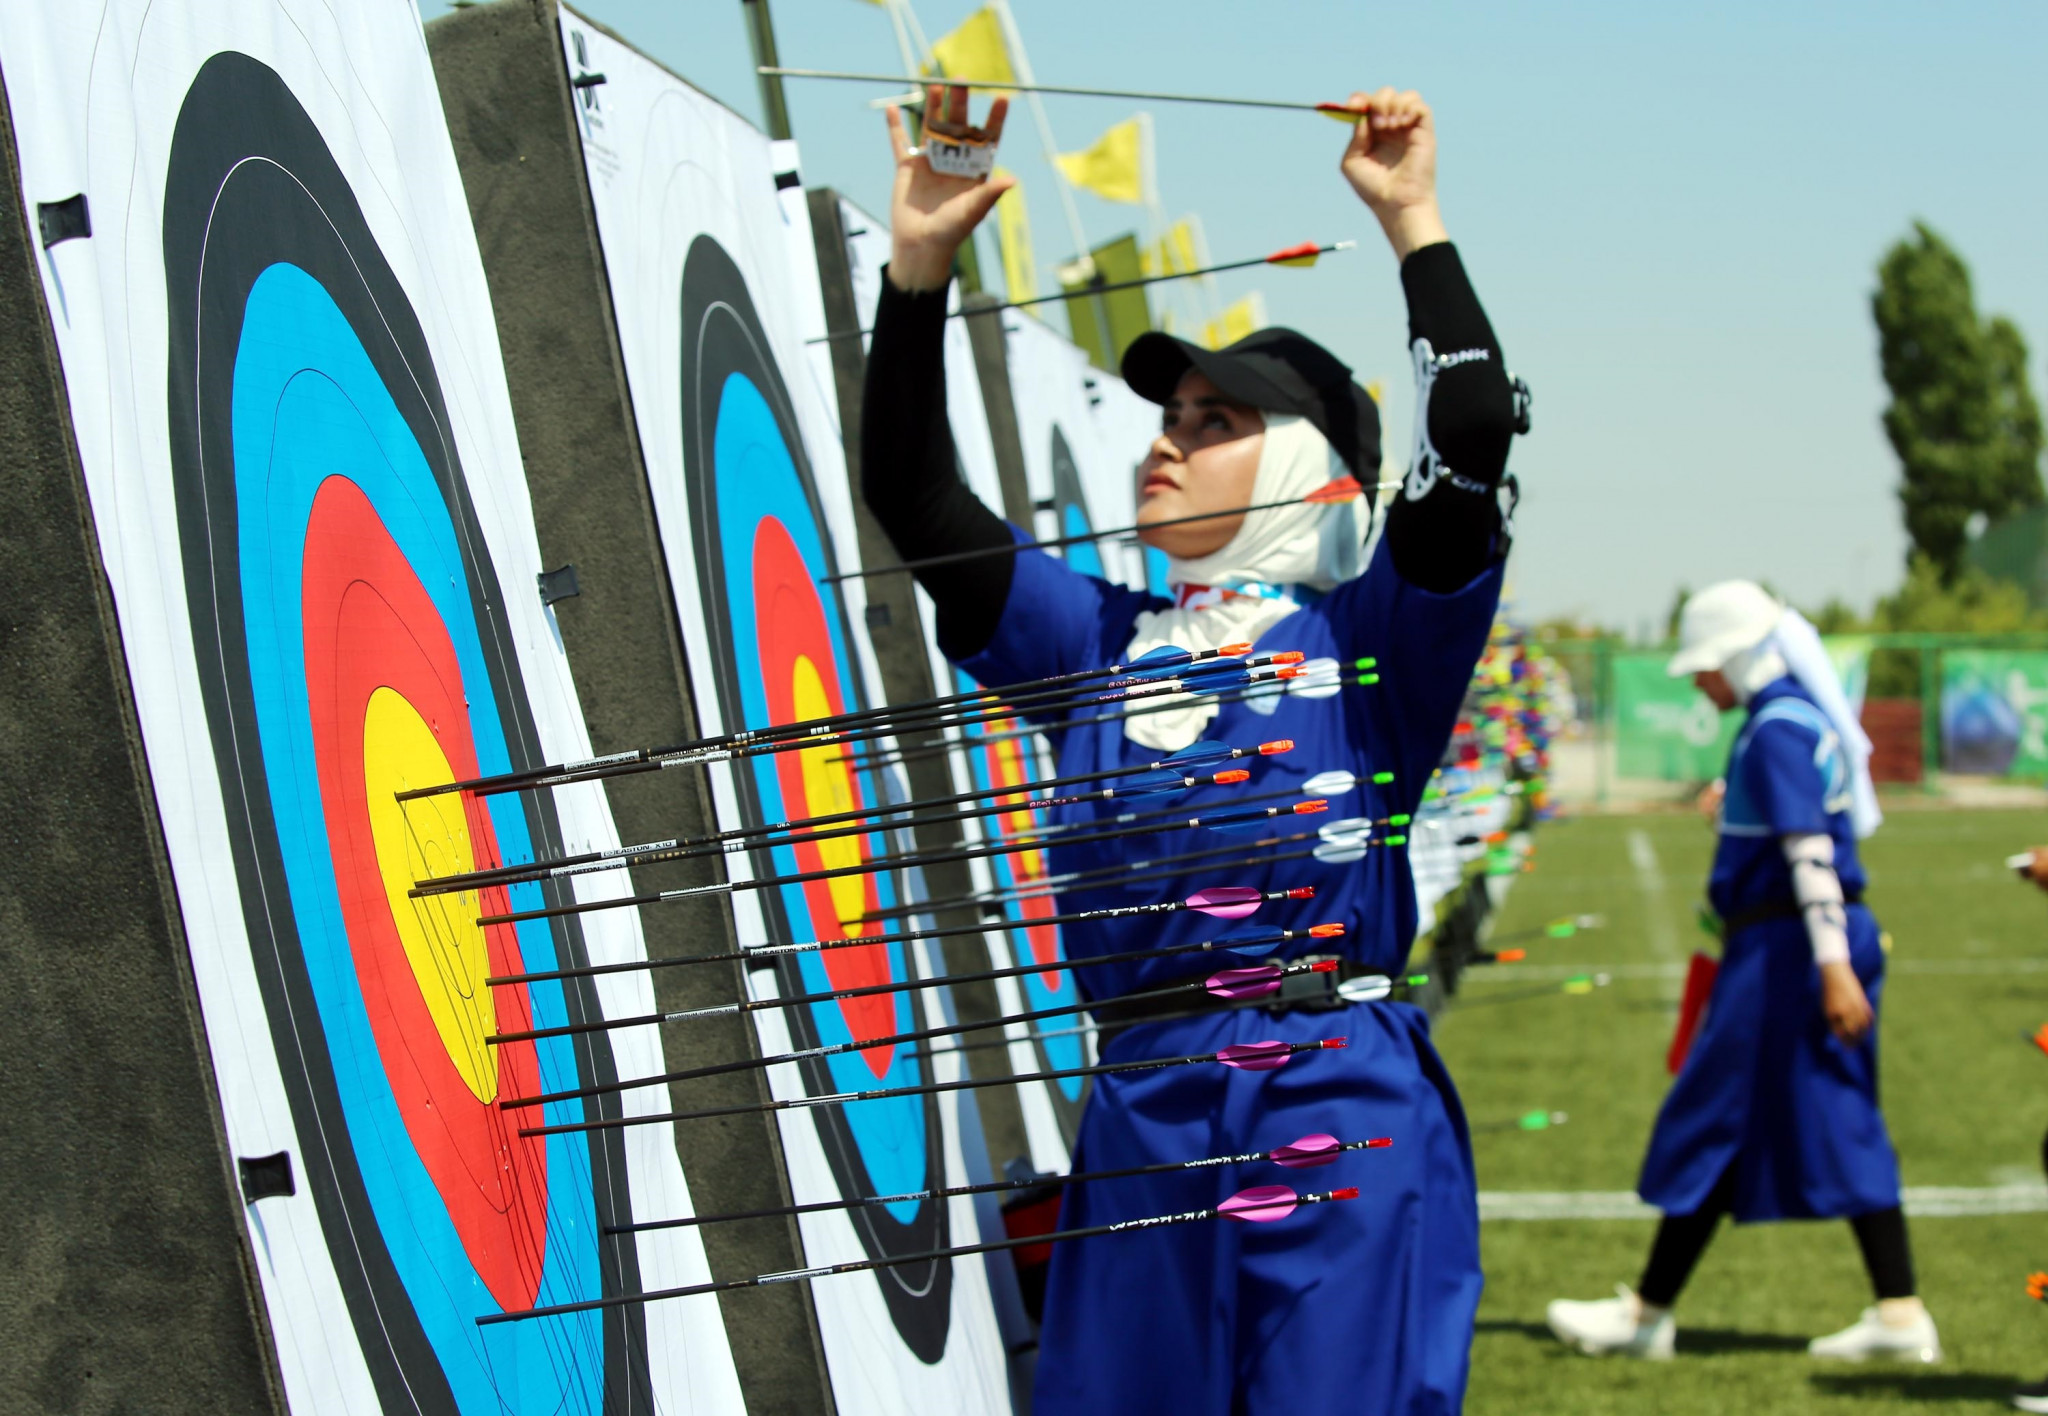 Archery competitions continued today at the Saracoglu Sports Facility in Konya ©Konya 2021